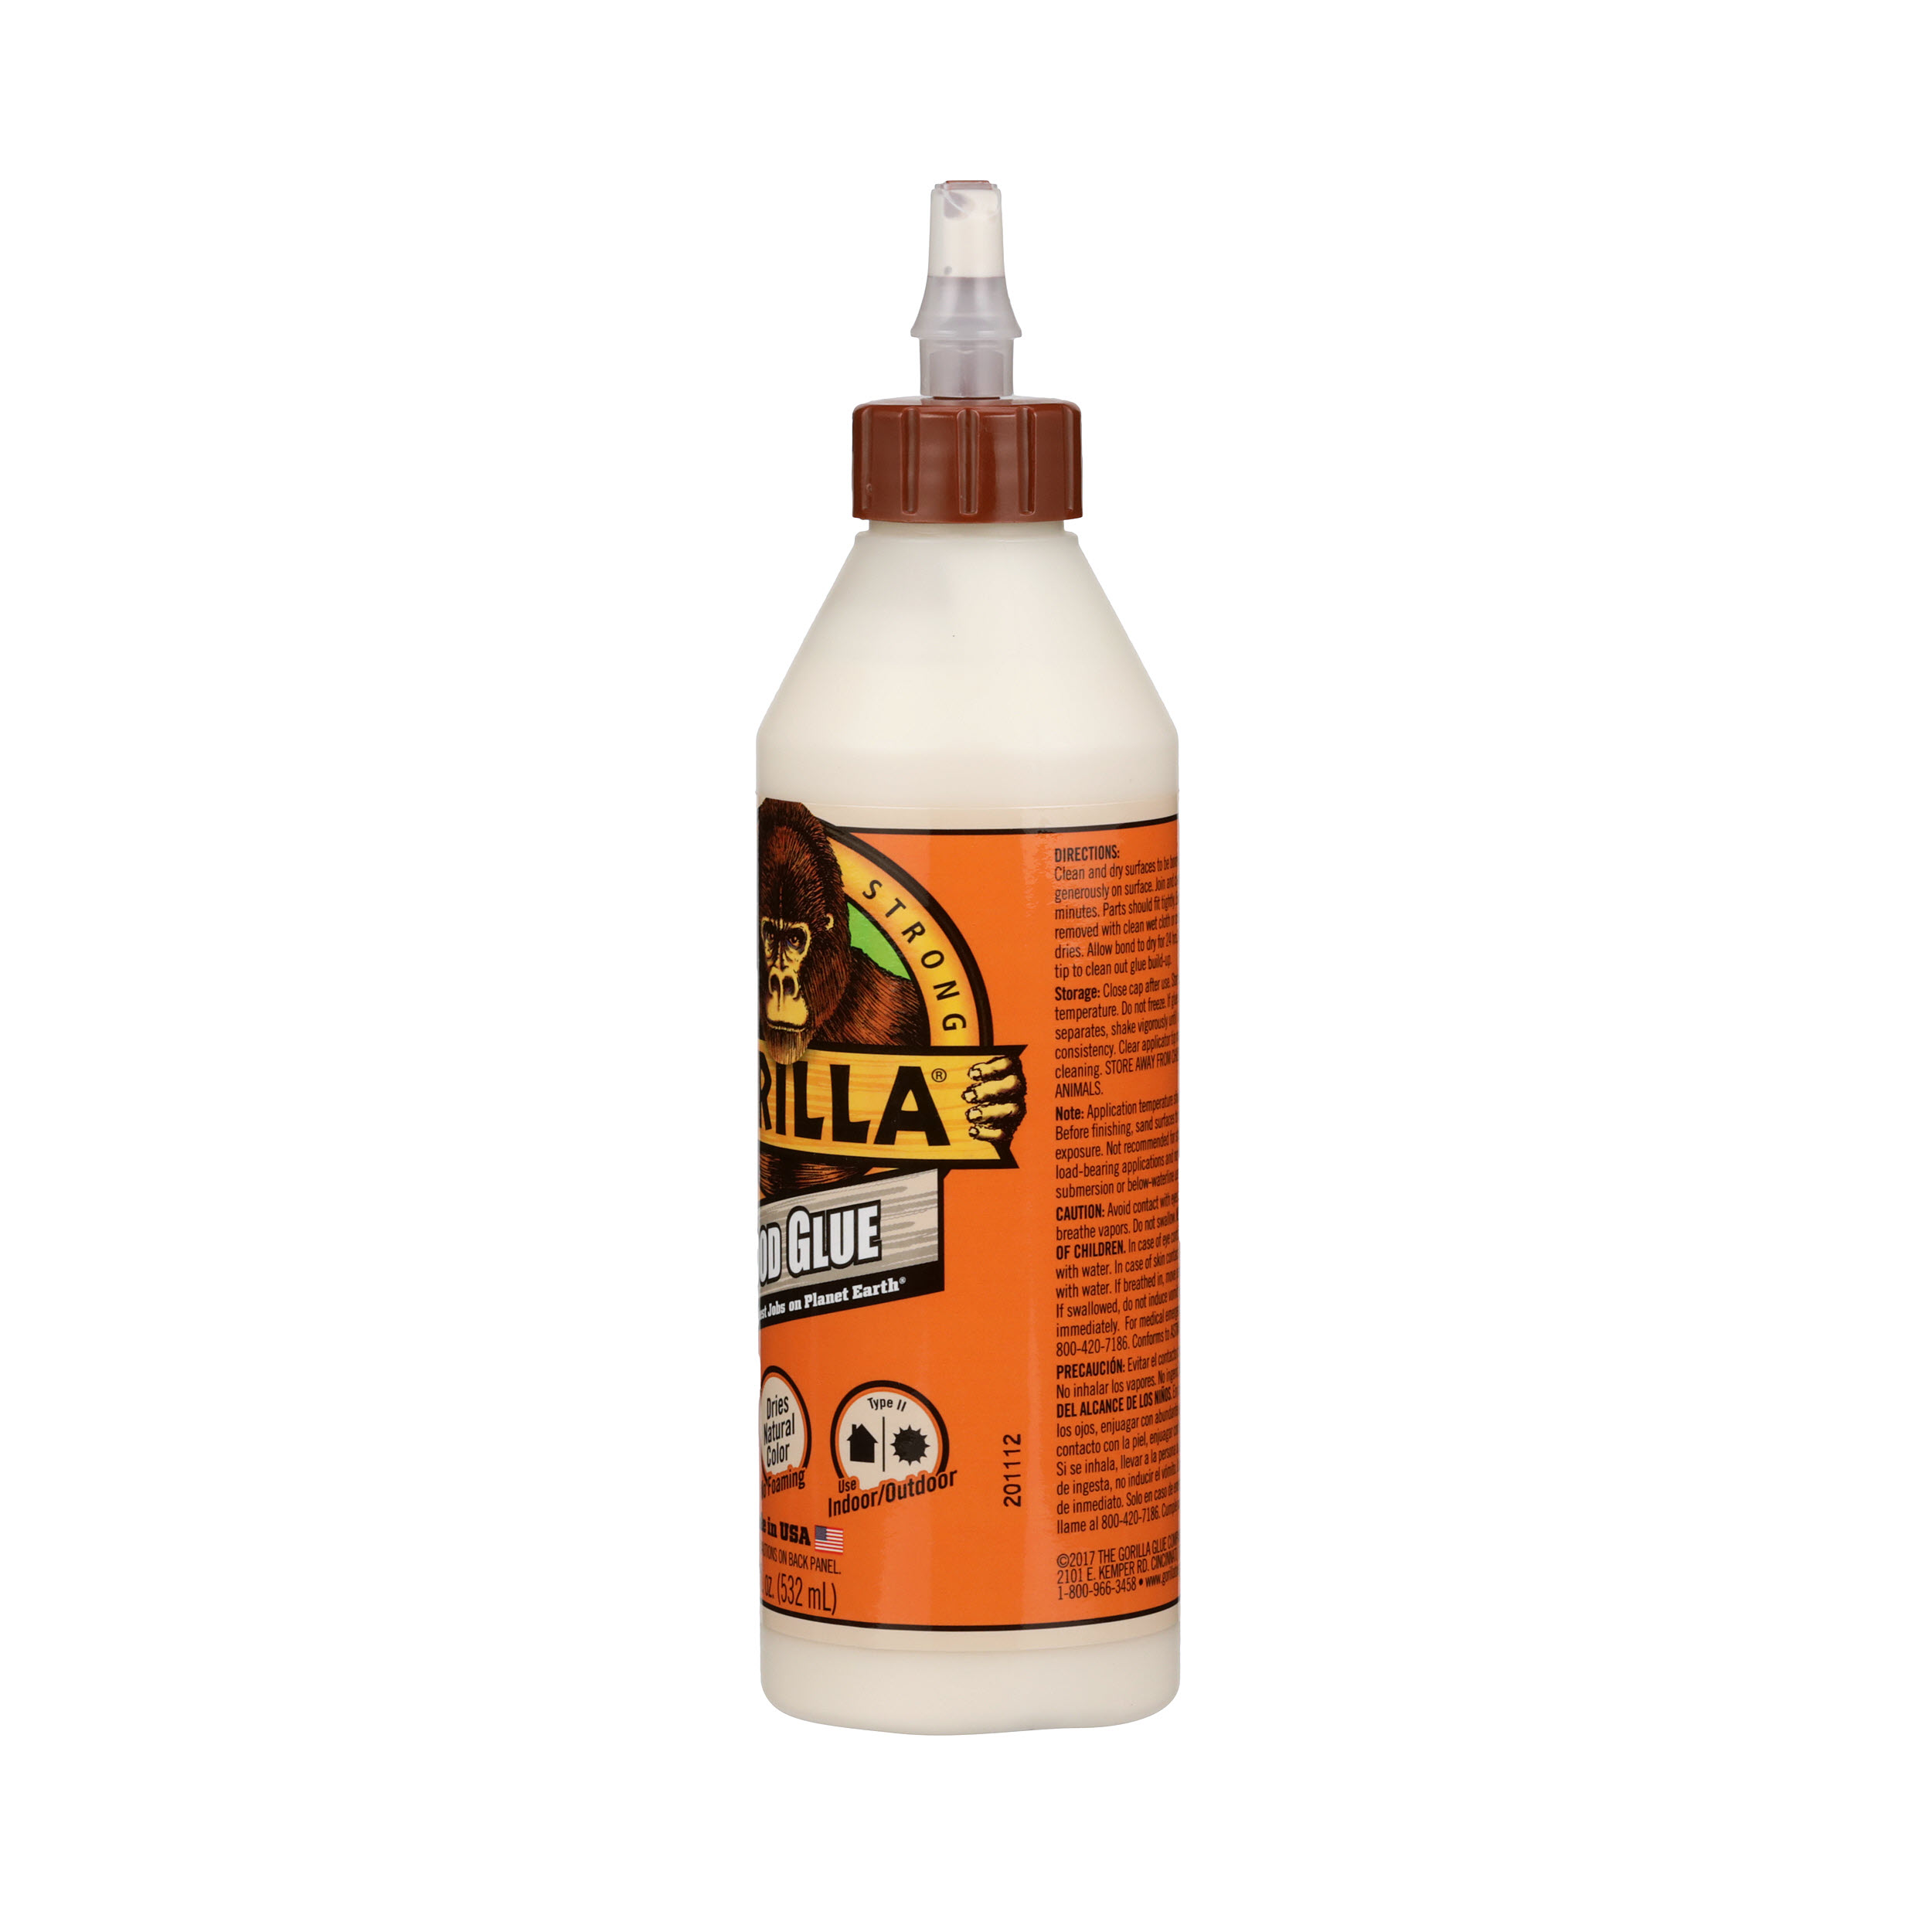 Gorilla Glue 18oz. Wood Glue. Color: White / Cream. Assembled Product  Weight Is 1.36 lb 